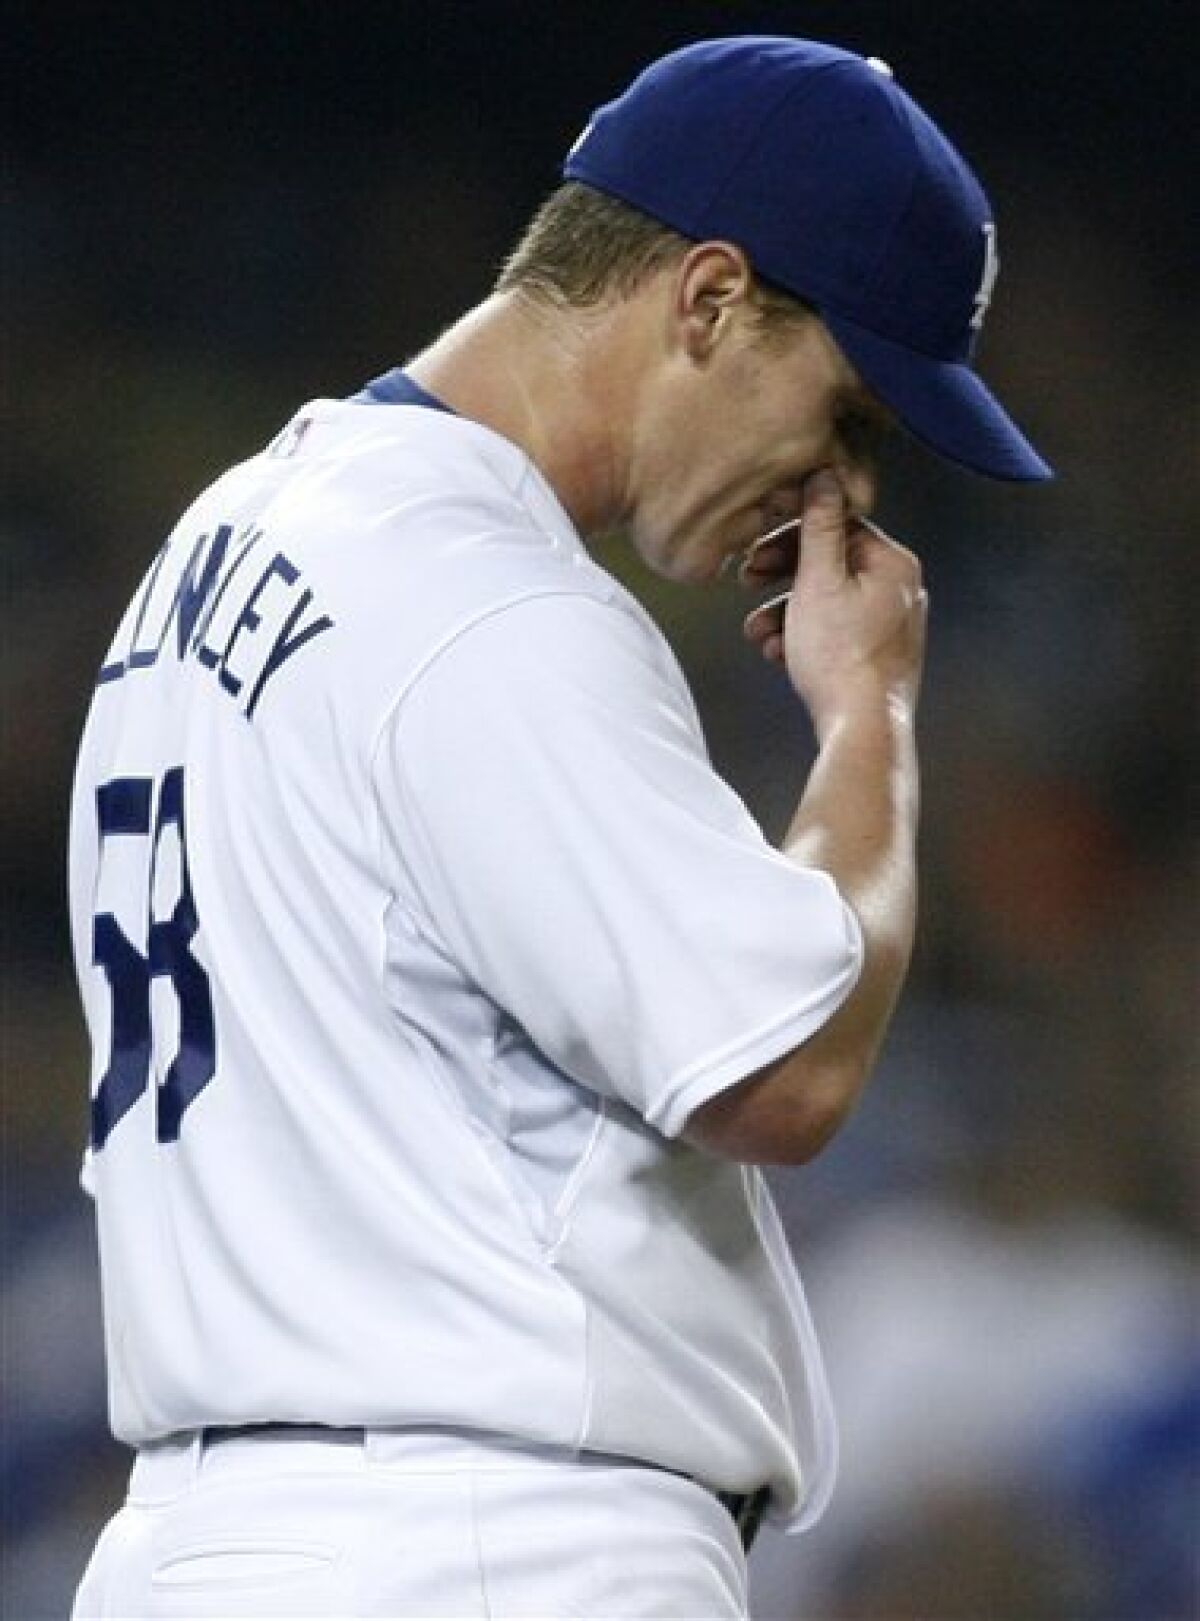 Los Angeles Dodgers starting pitcher Chad Billingsley reacts after San Francisco Giants' Pablo Sandoval hit an infield single to score Emmanuel Burriss during the seventh inning of an MLB baseball game in Los Angeles on Friday, May 8, 2009. (AP Photo/Danny Moloshok)